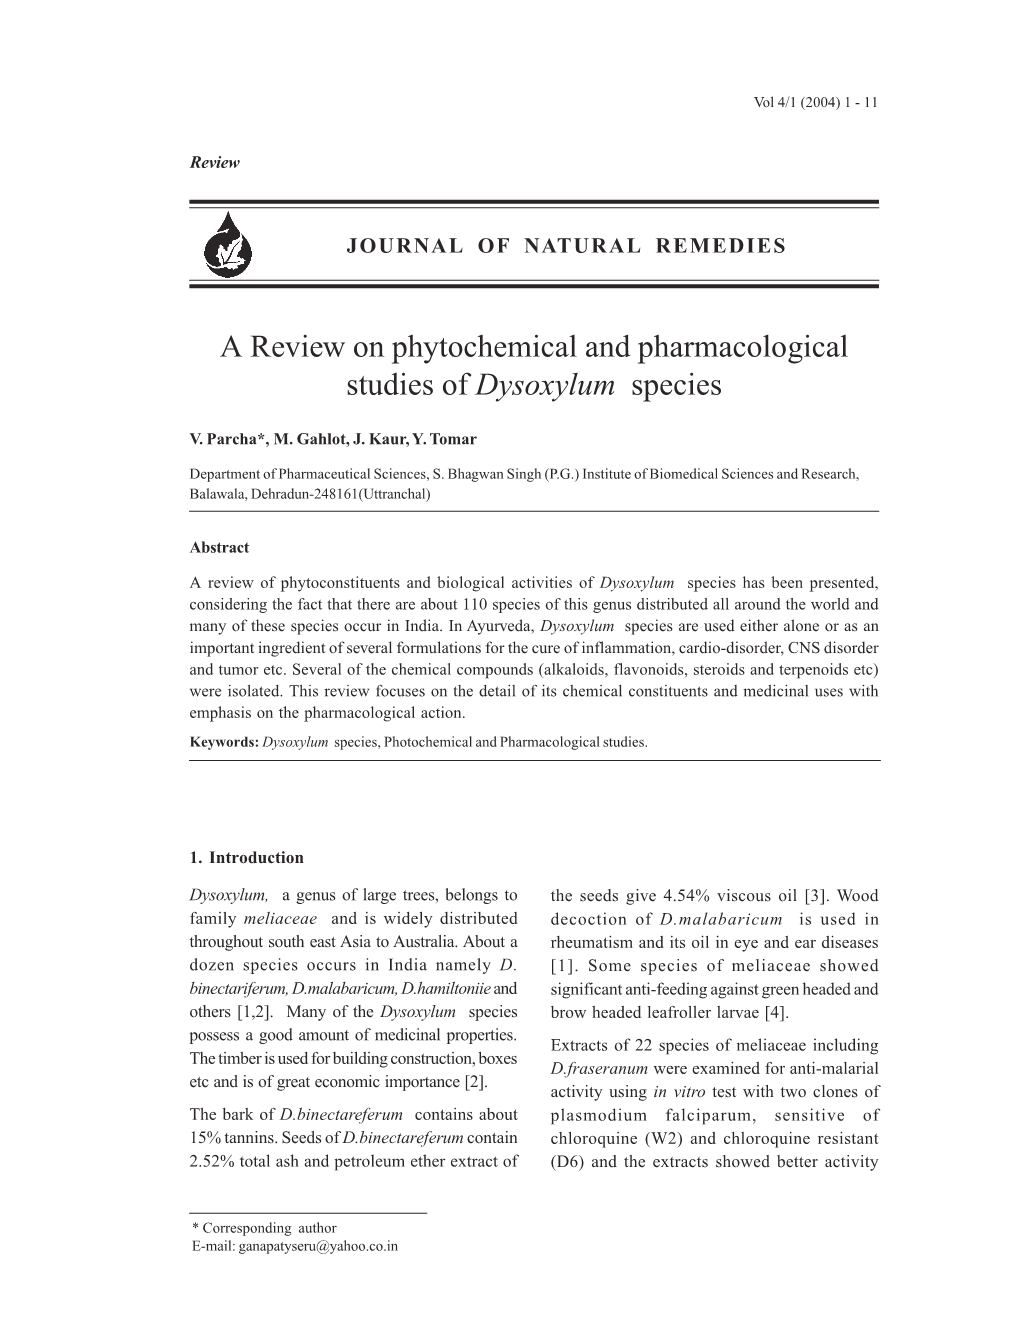 A Review on Phytochemical and Pharmacological Studies of Dysoxylum Species